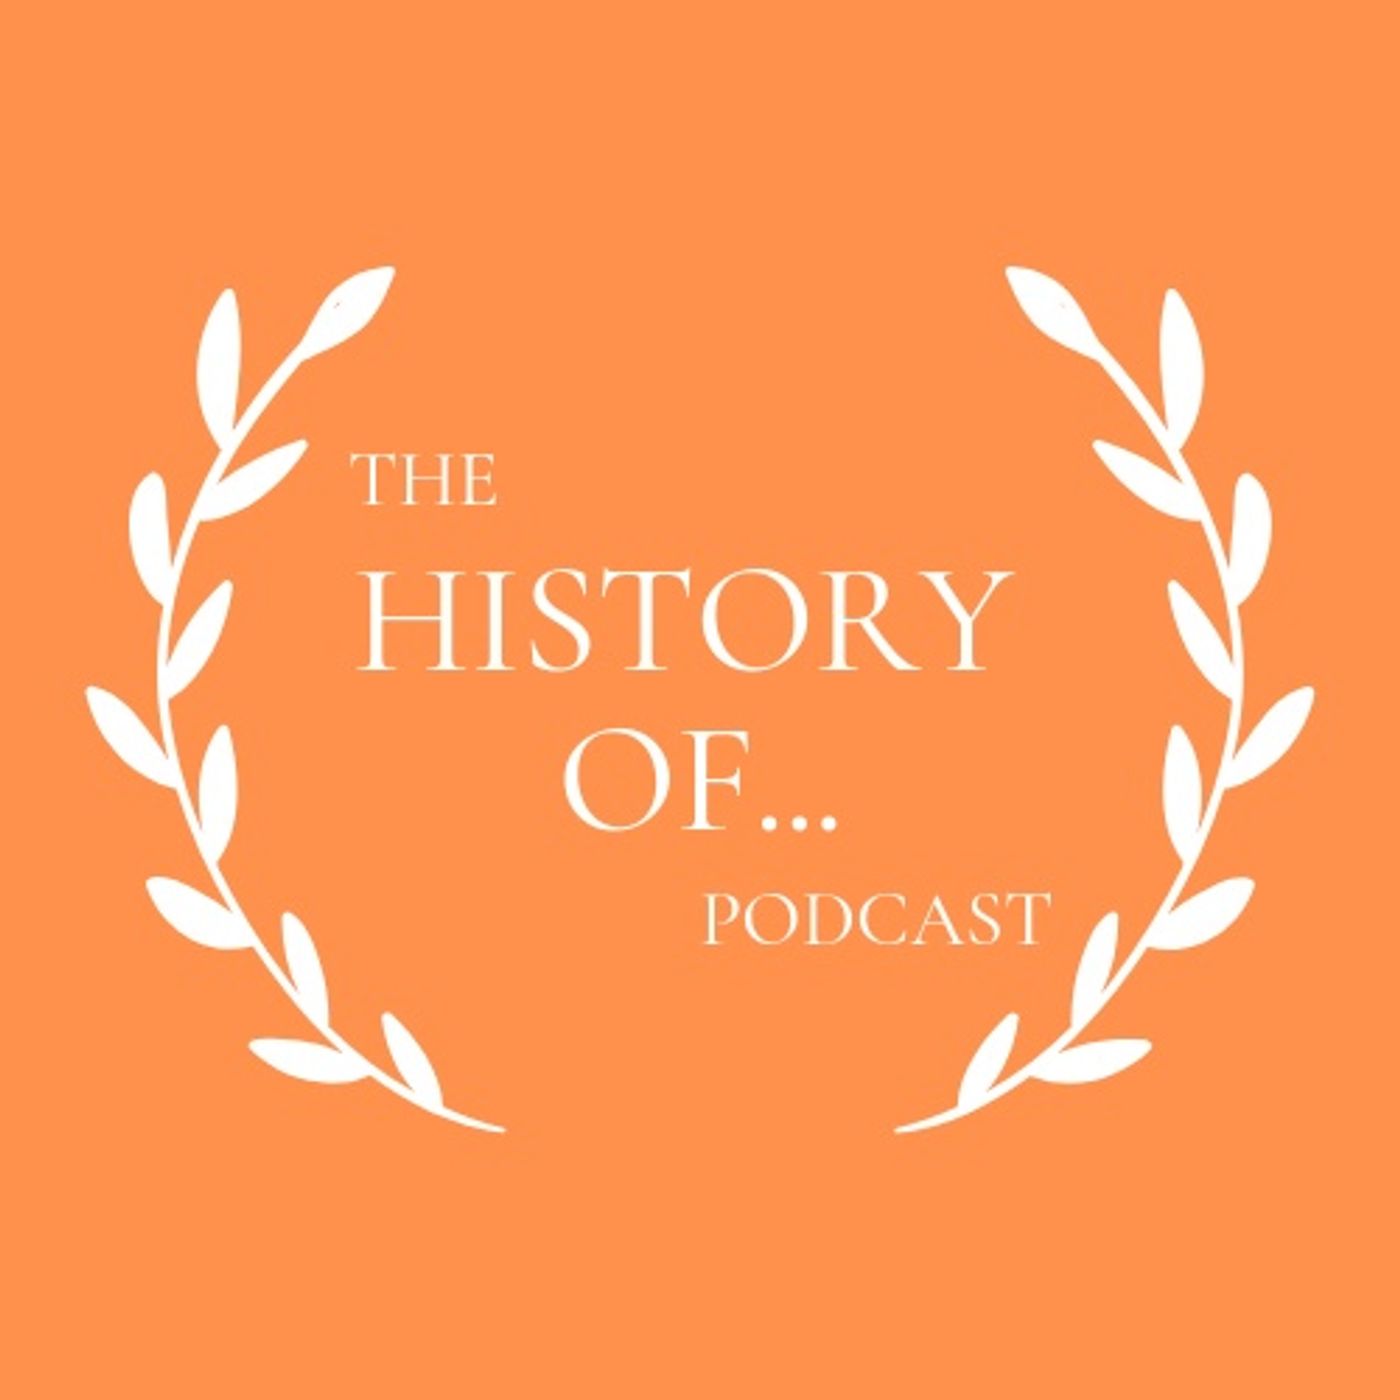 The History Of Podcast